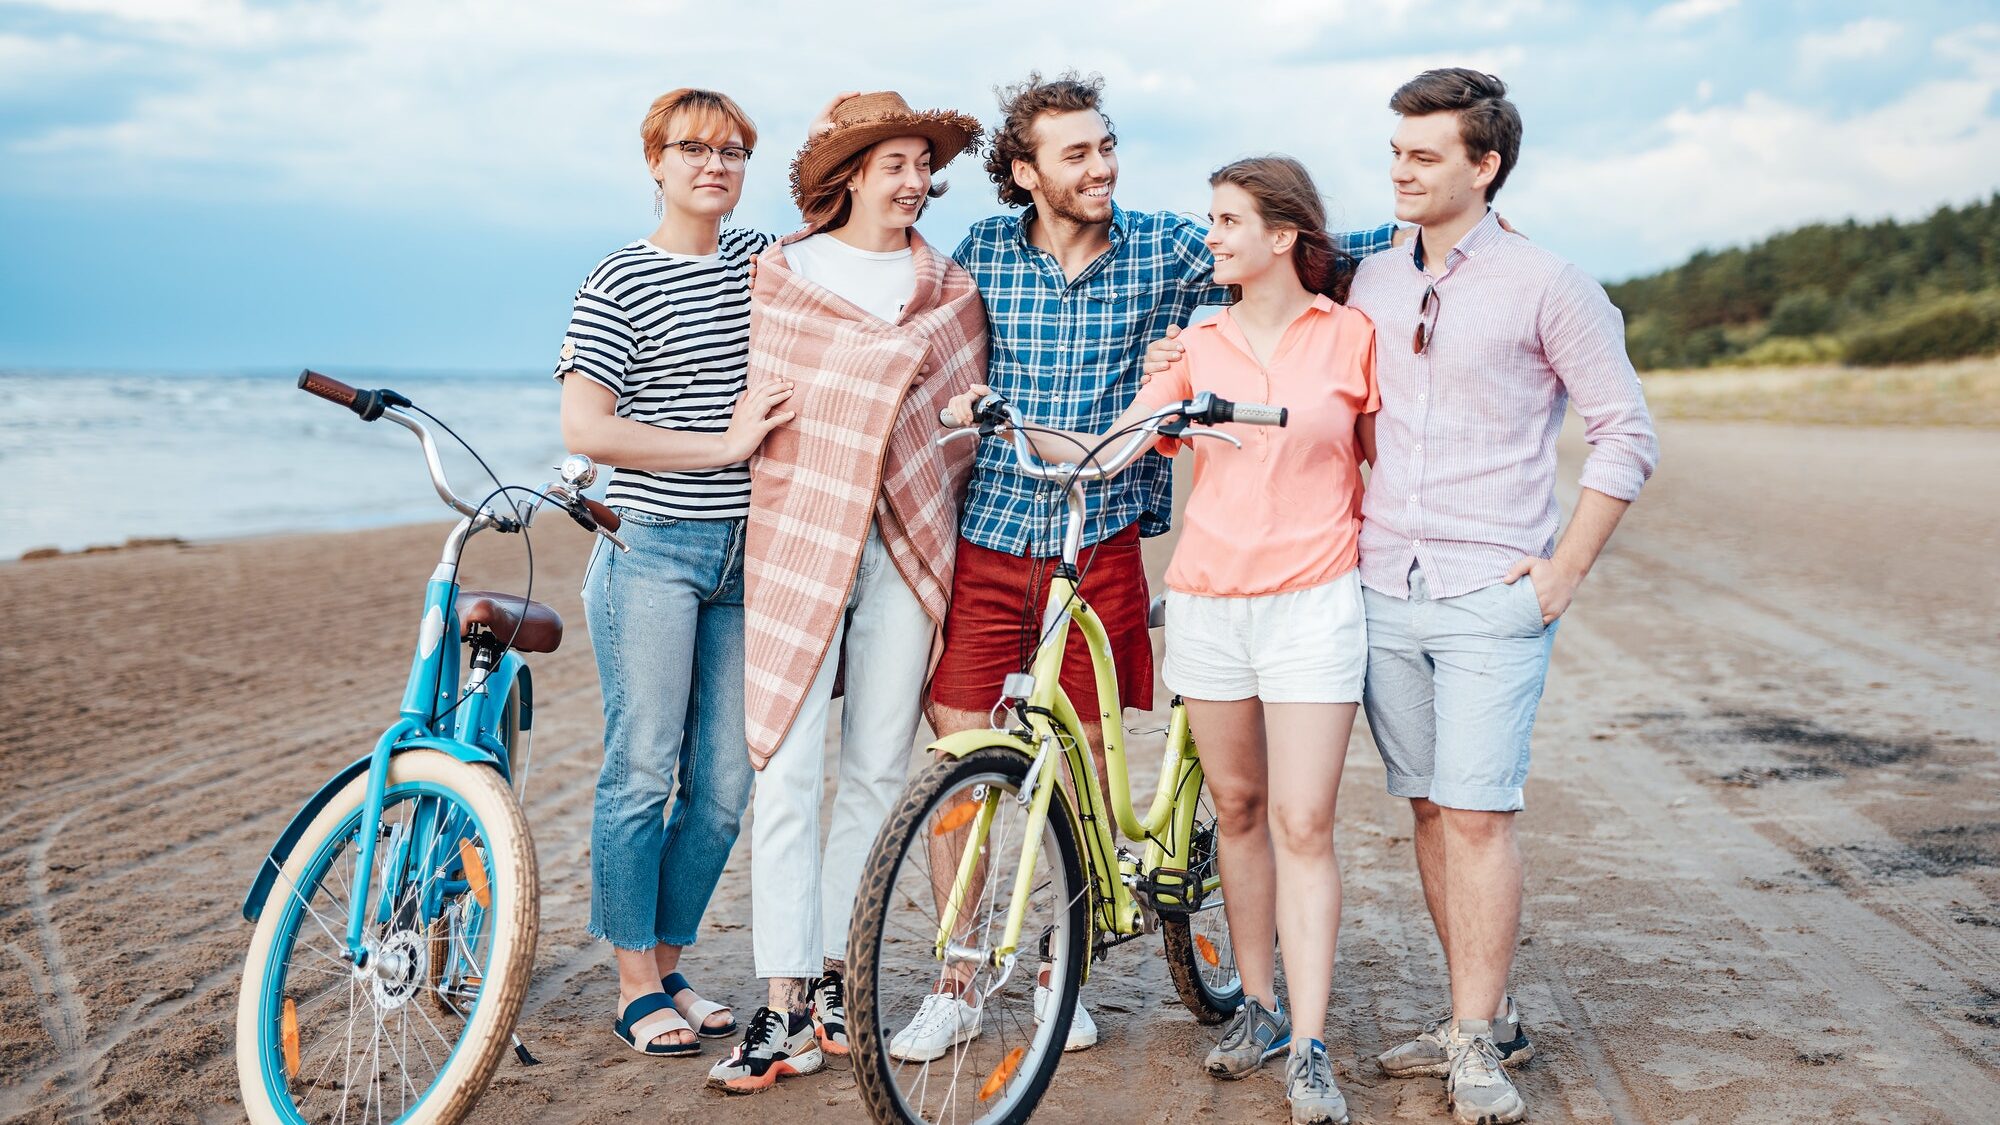 Five friends on the beach with their bicycles, hugging each other